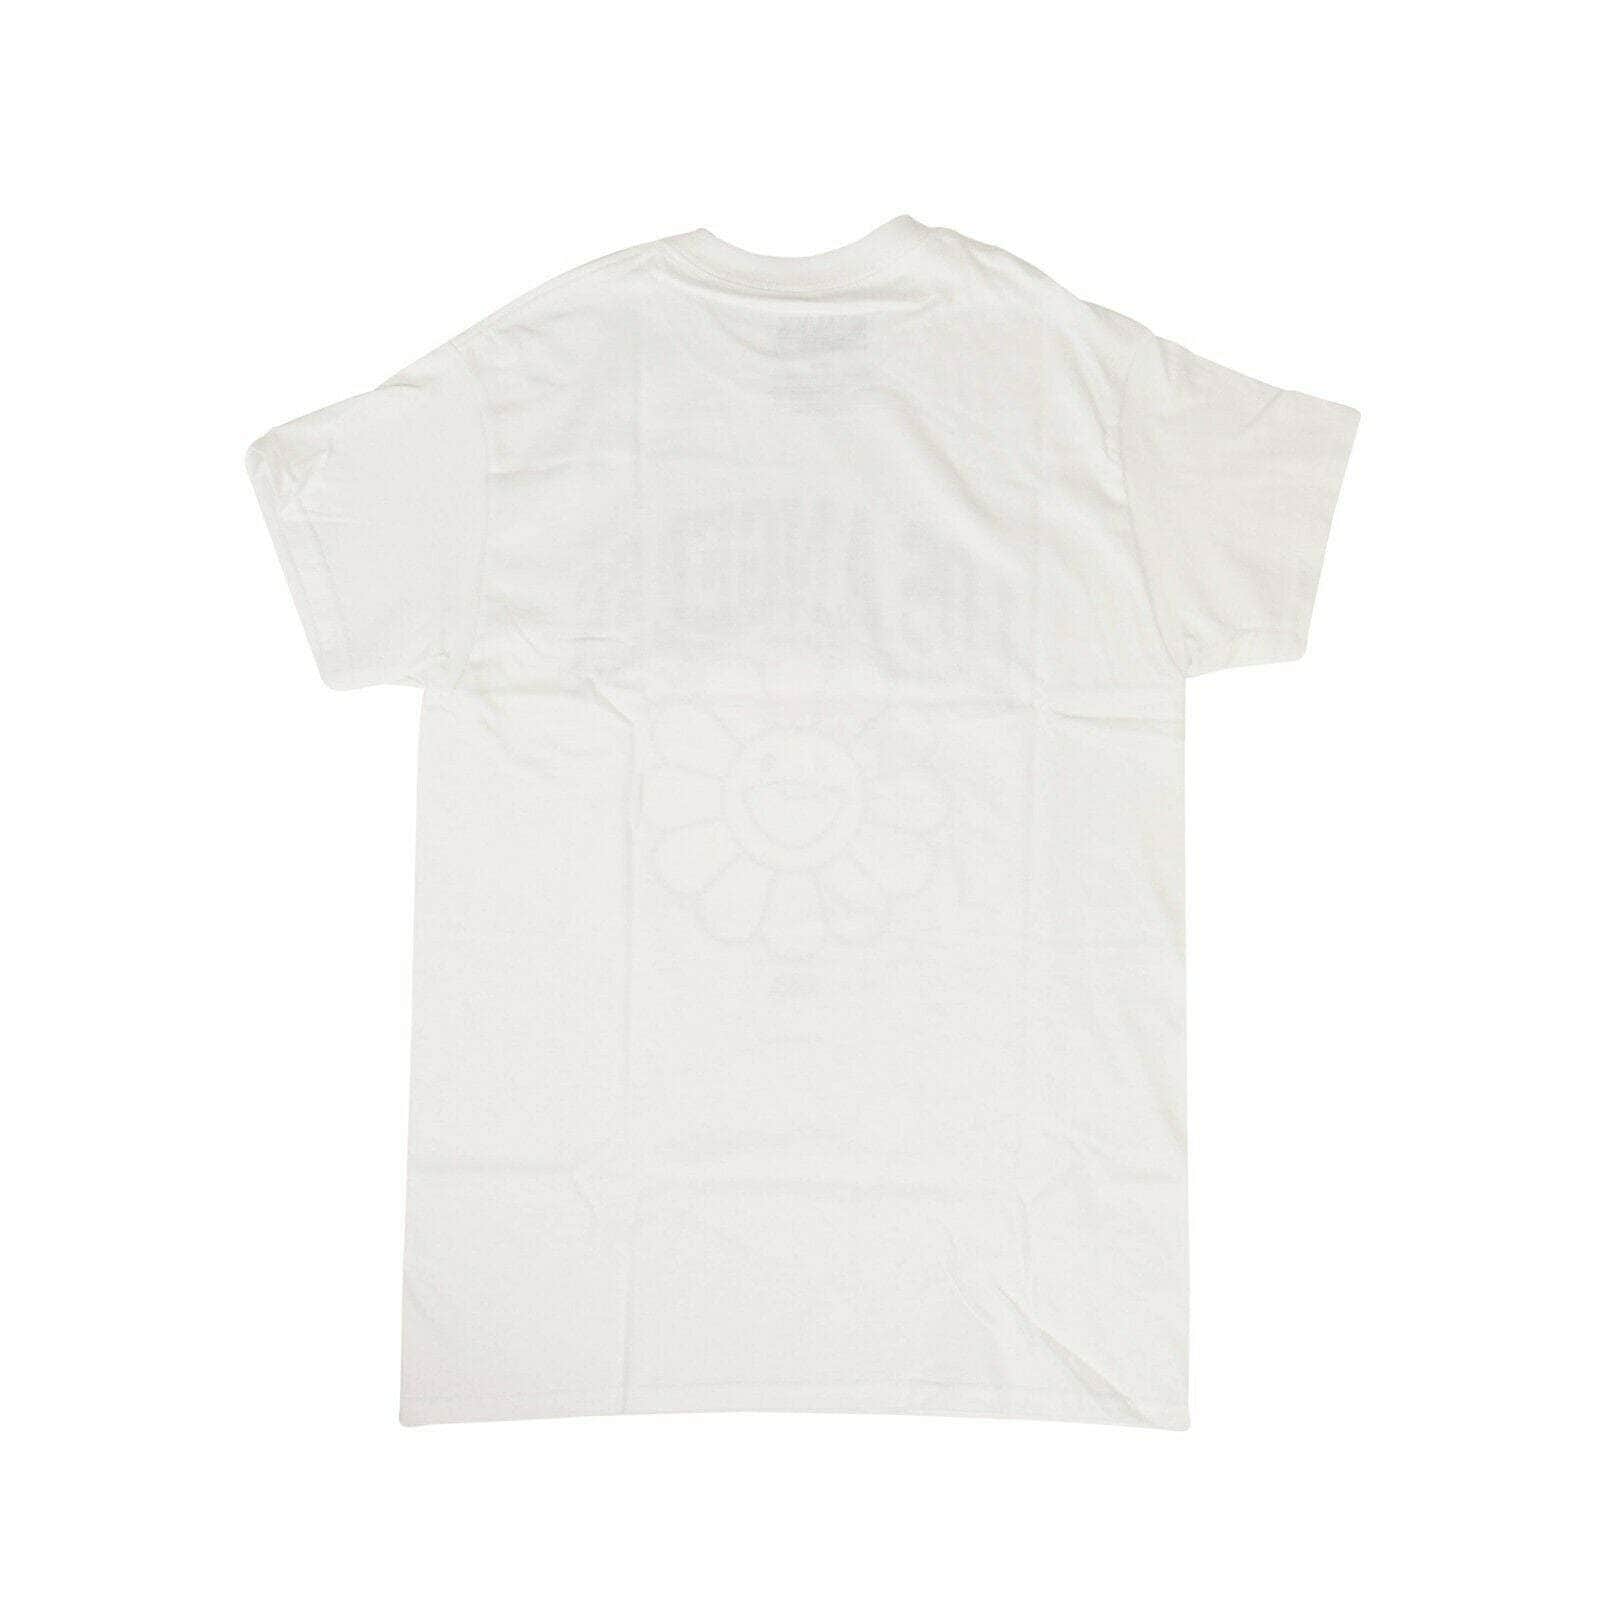 Takashi Murakami chicmi, couponcollection, gender-mens, main-clothing, mens-shoes, size-s, t-shirt, takashi-murakami, under-250 S / CCLASS-002 TAKASHI MURAKAMI x COMPLEXCON 'Los Angeles Flower' T-Shirt - White 78TM-13/S 78TM-13/S